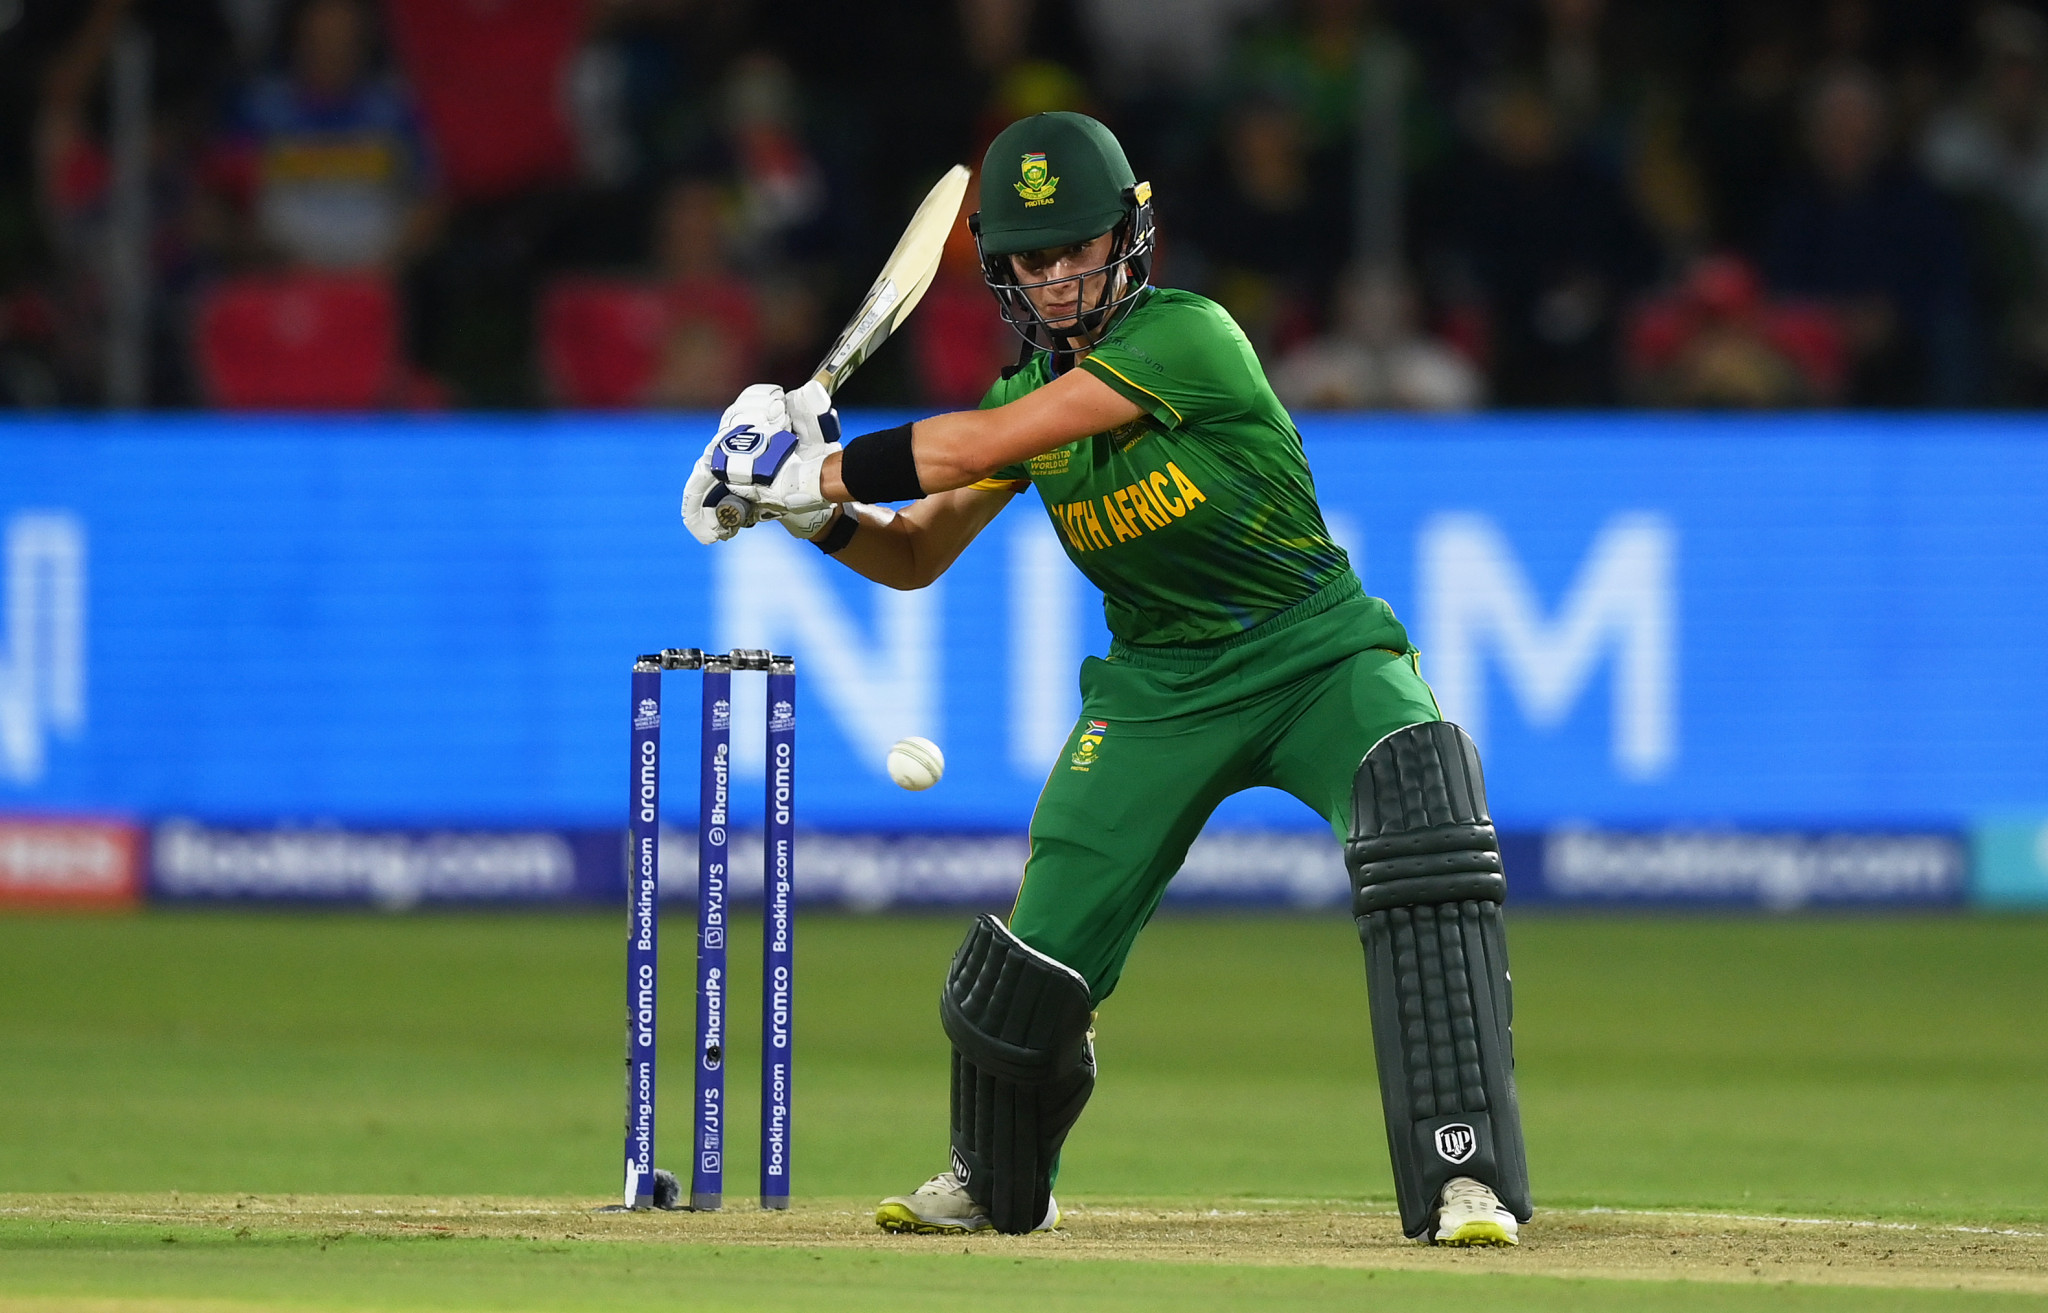 Laura Wolvaardt scored 66 runs as South Africa sealed their semi-final place at the Women's T20 World Cup with a ten-wicket win over Bangladesh ©Getty Images